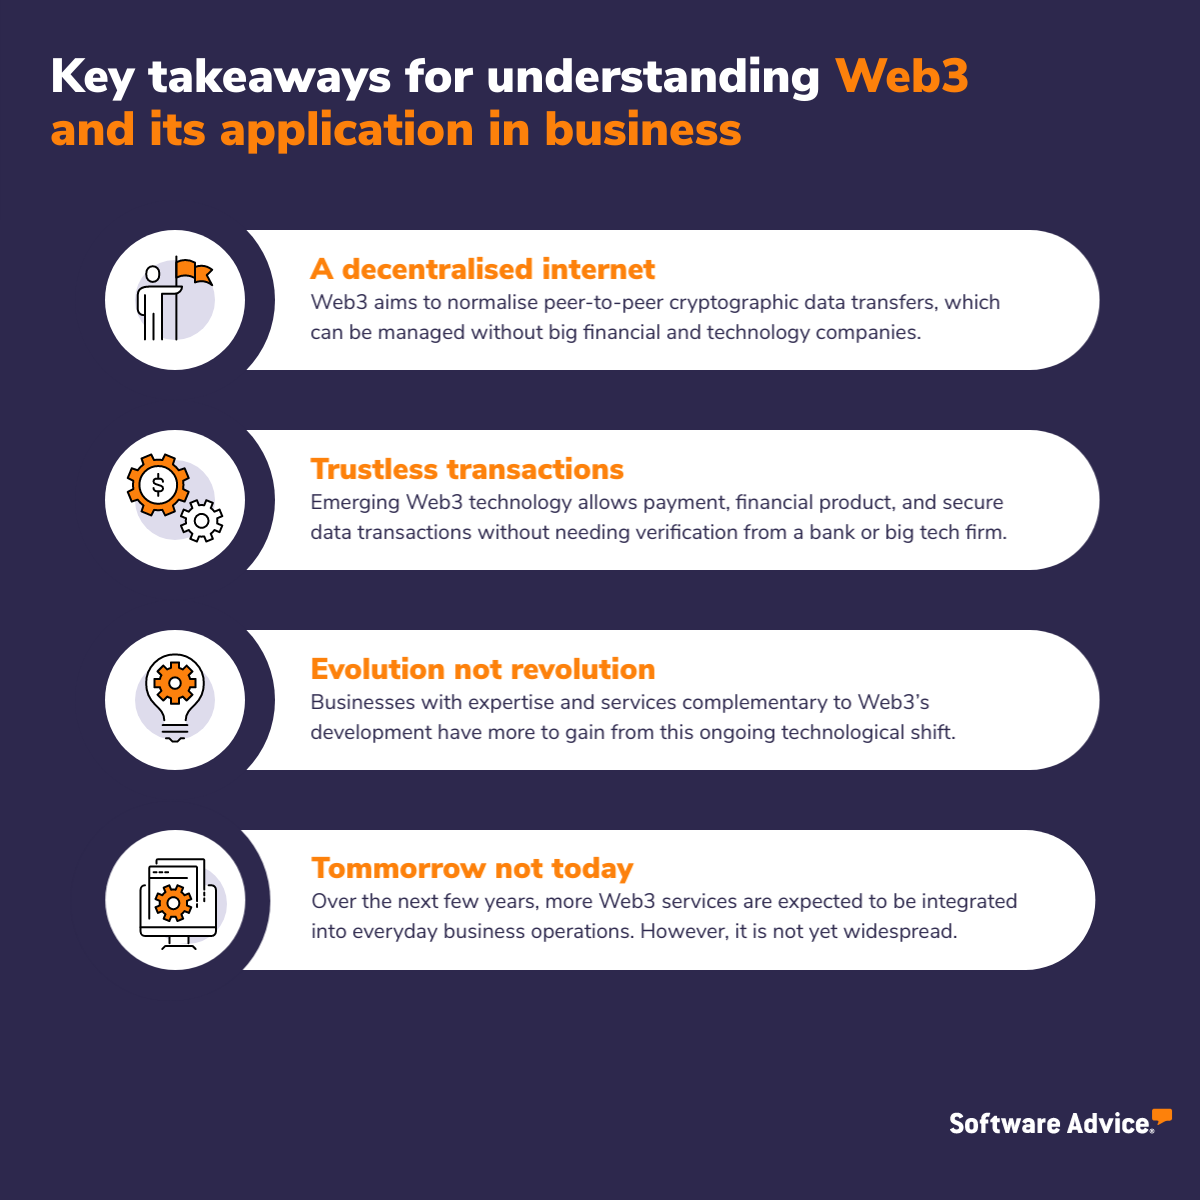 graphic depicting key takeaways of Web3 for businesses